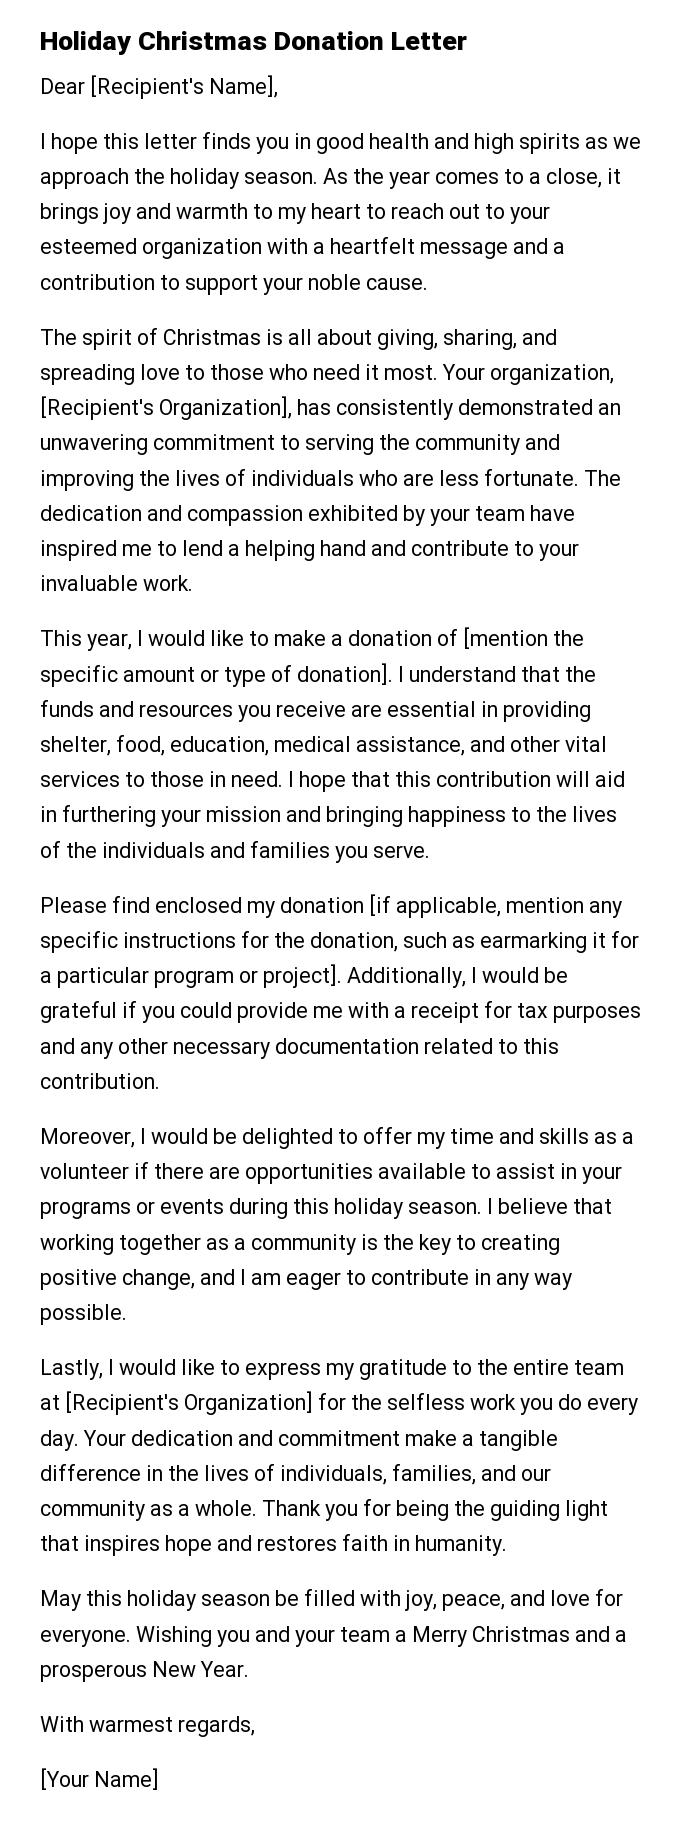 Holiday Christmas Donation Letter